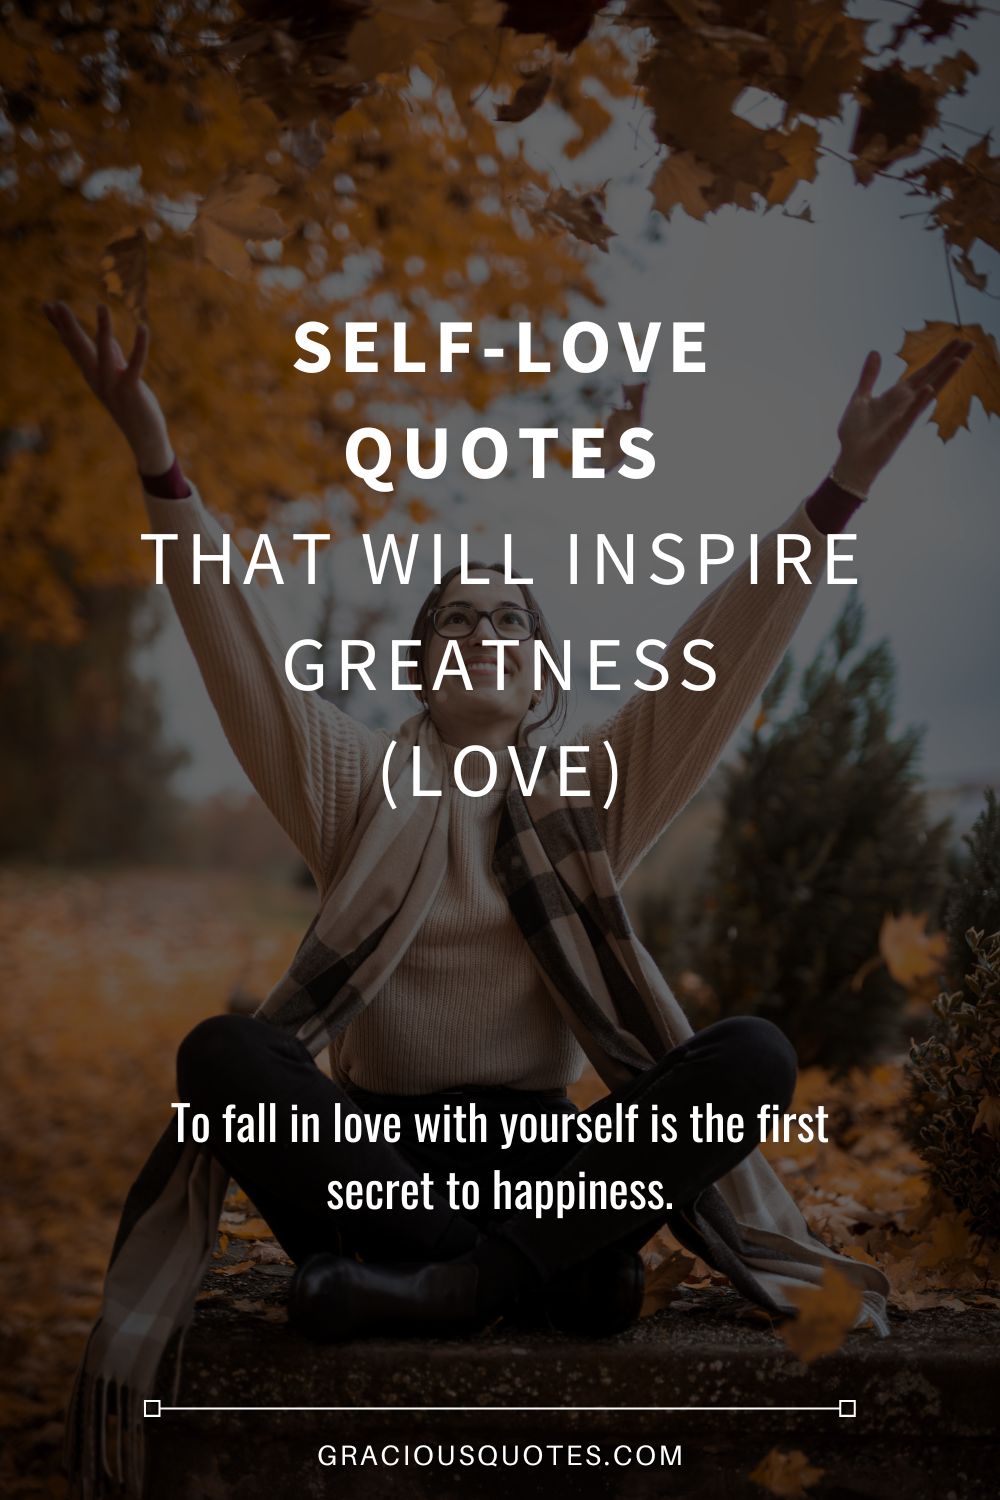 Self-Love Quotes that Will Inspire Greatness (LOVE) - Gracious Quotes